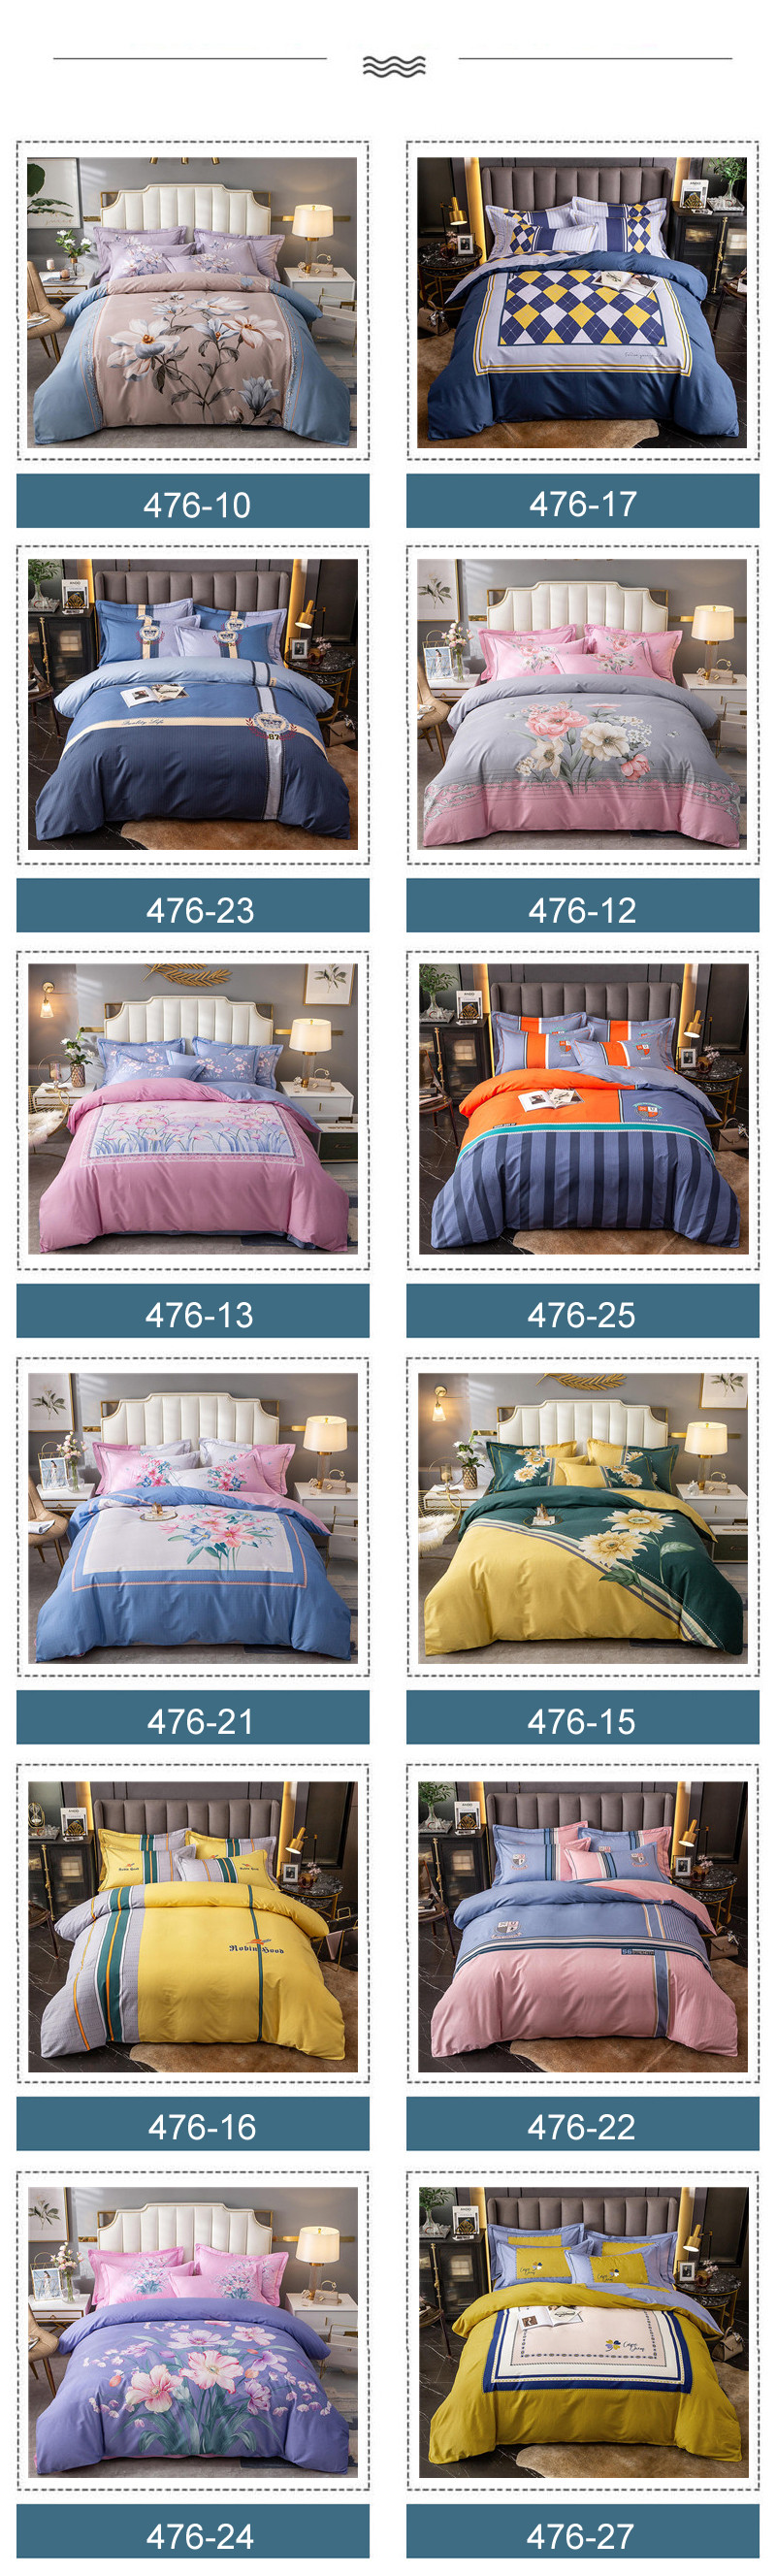 Bed Sheets Online Cheap